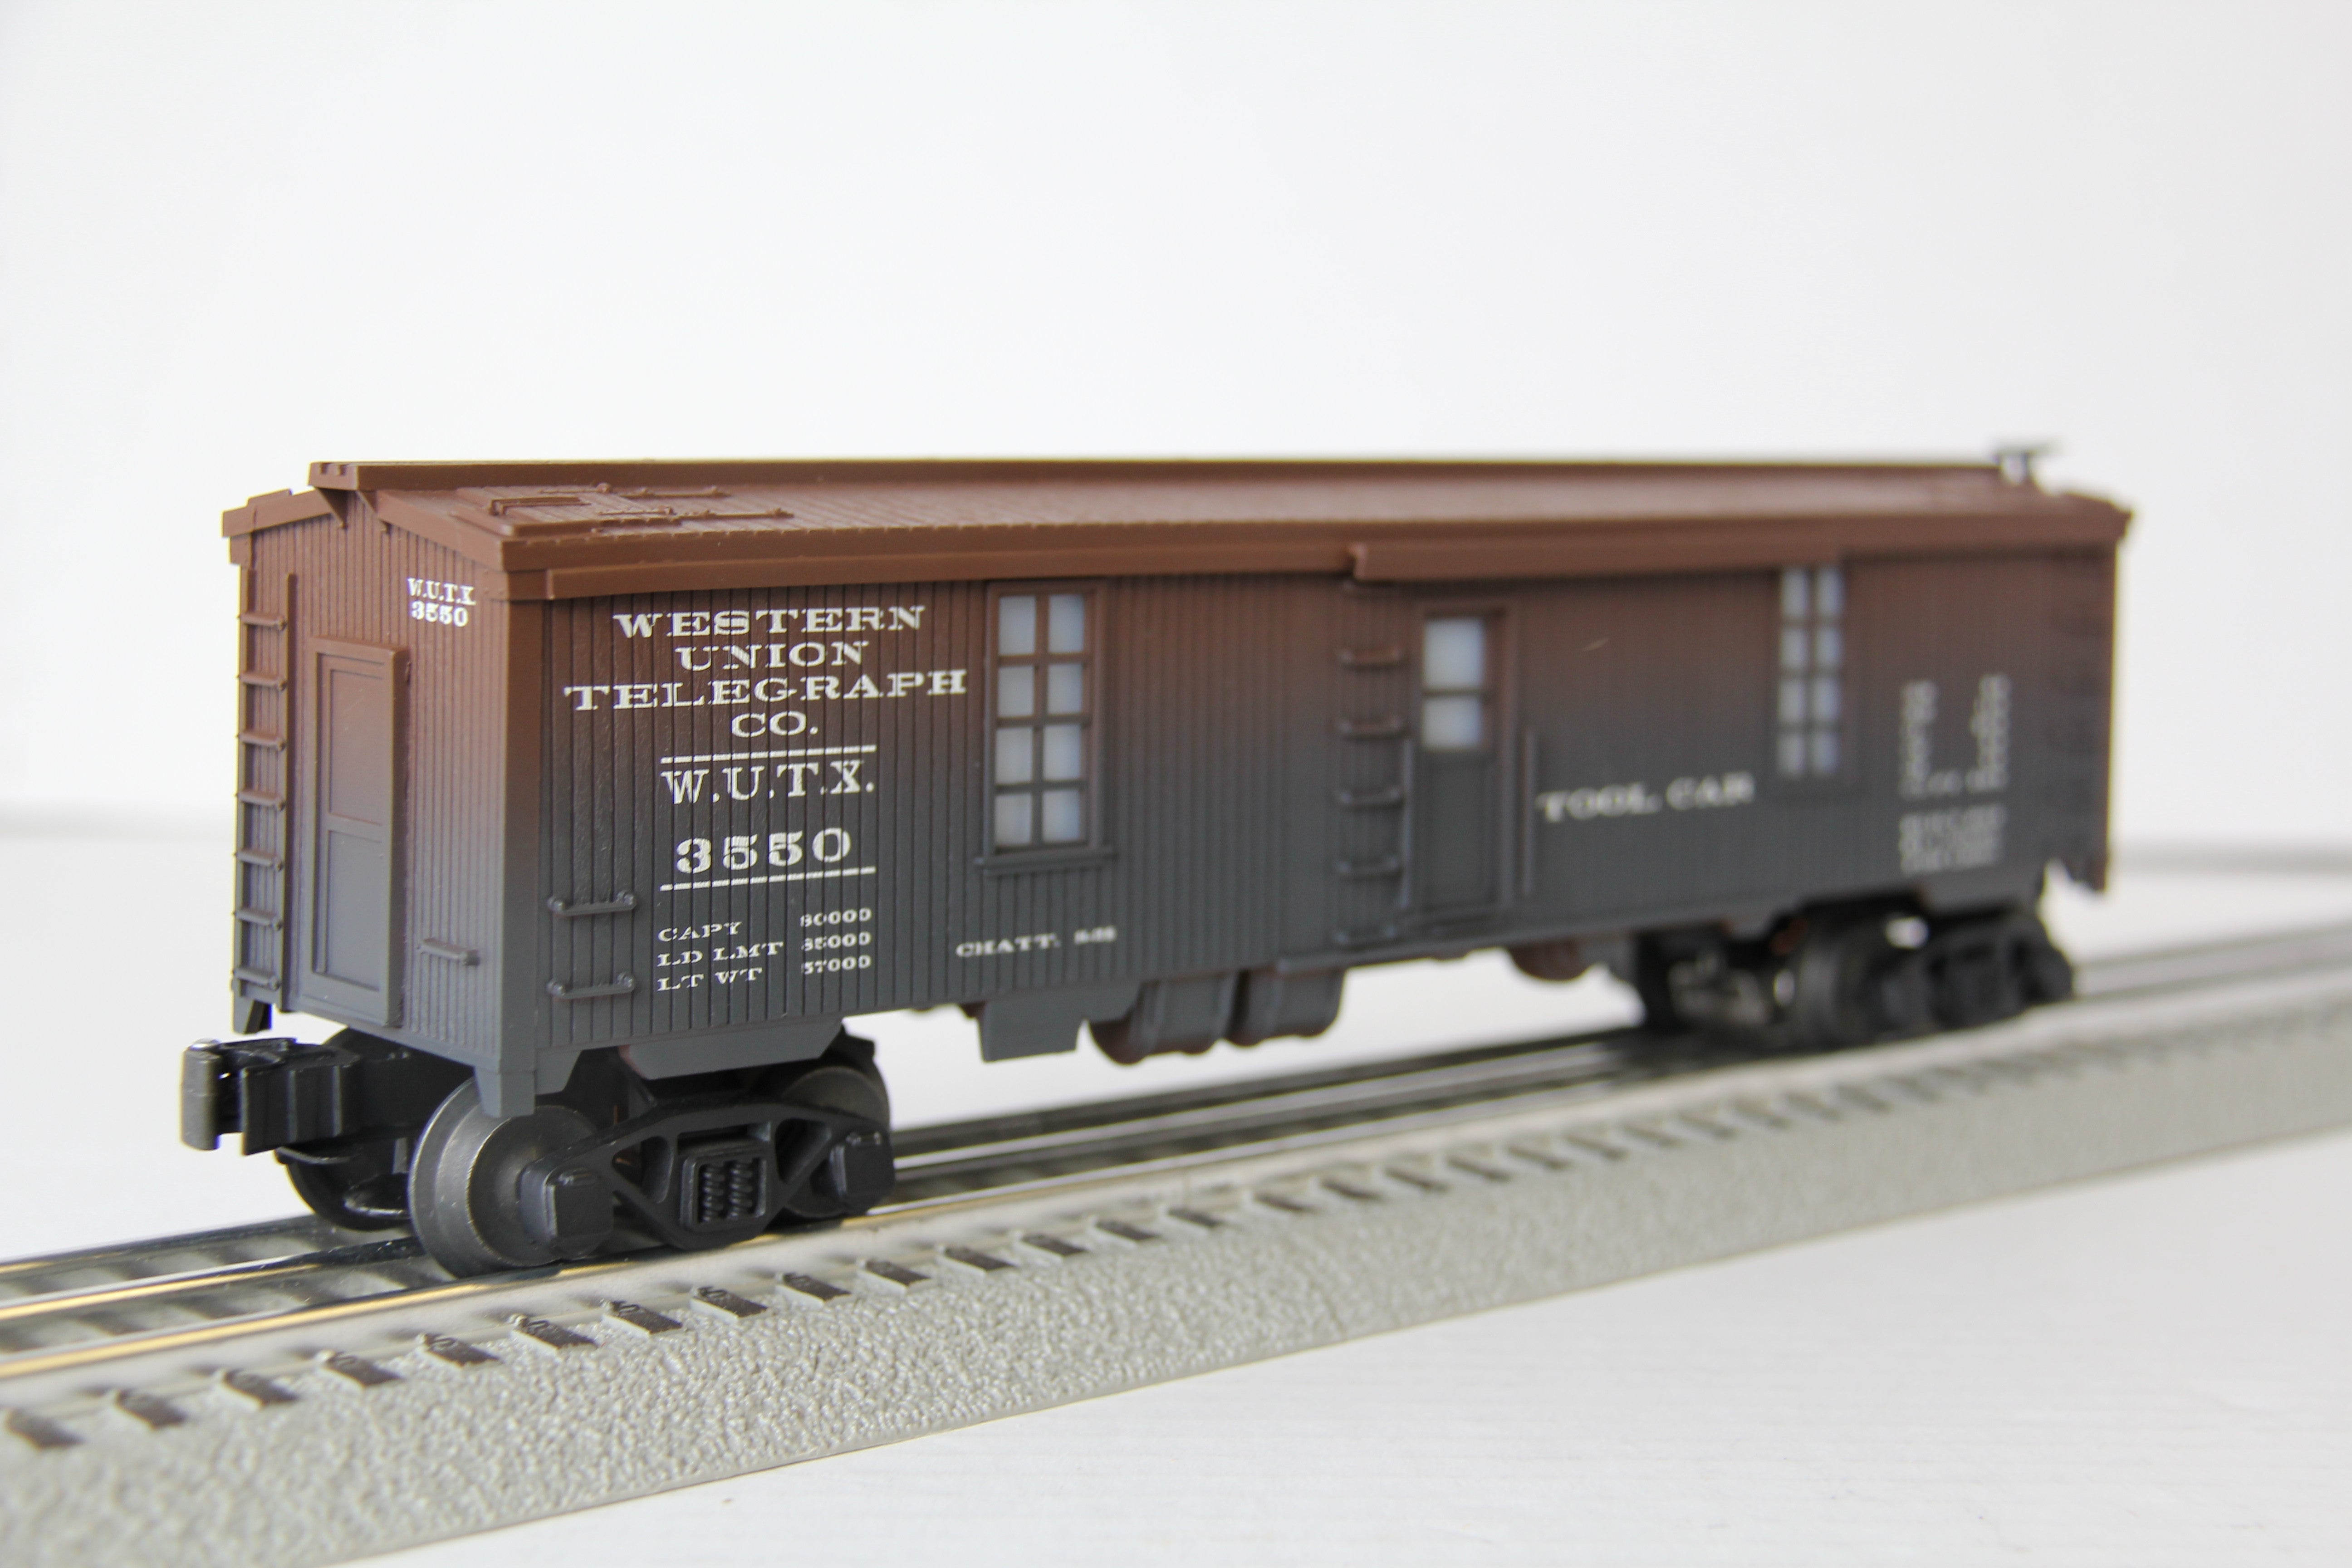 Lionel 6-19992 LRRC Tool Car-Second hand-M4230